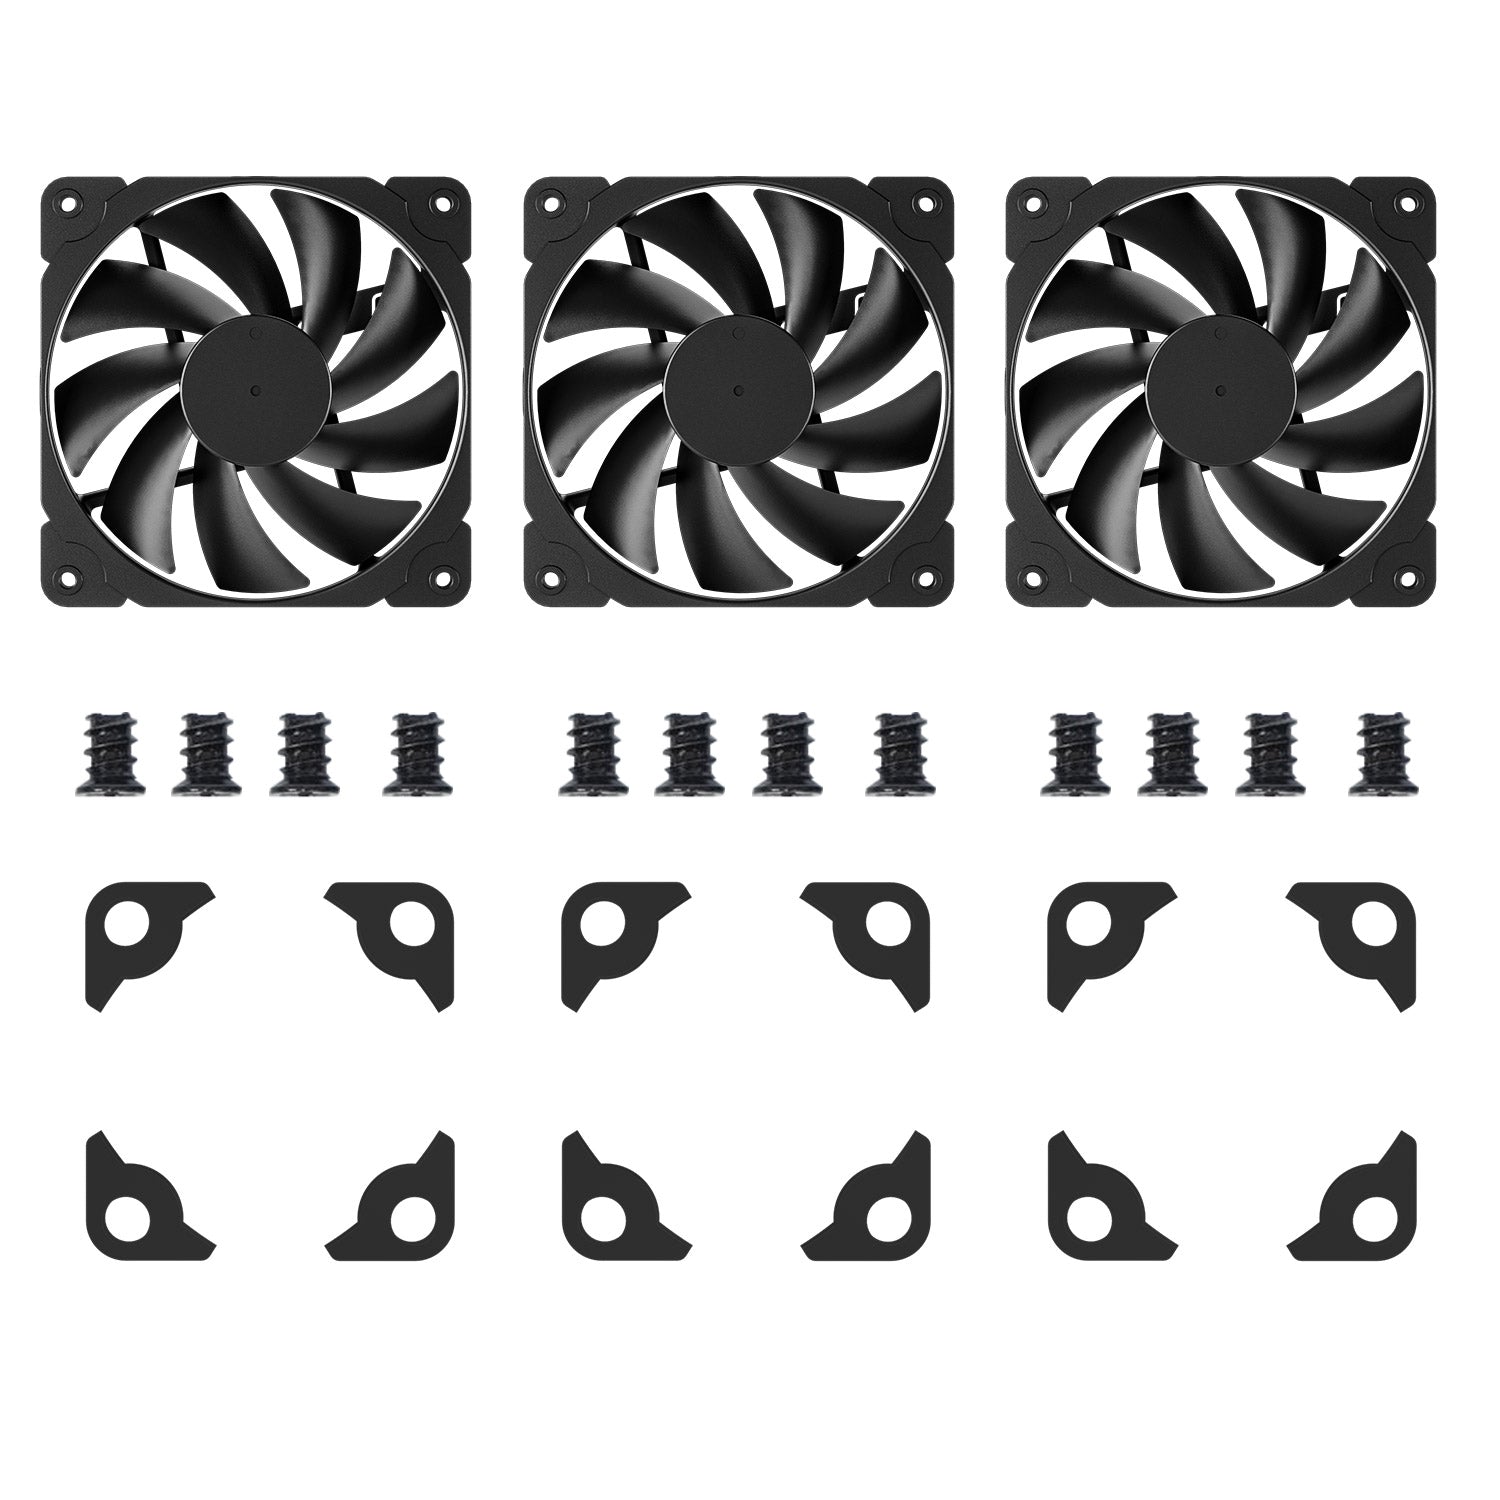 3 x 120mm Cooling Fans Kit for Computer Case